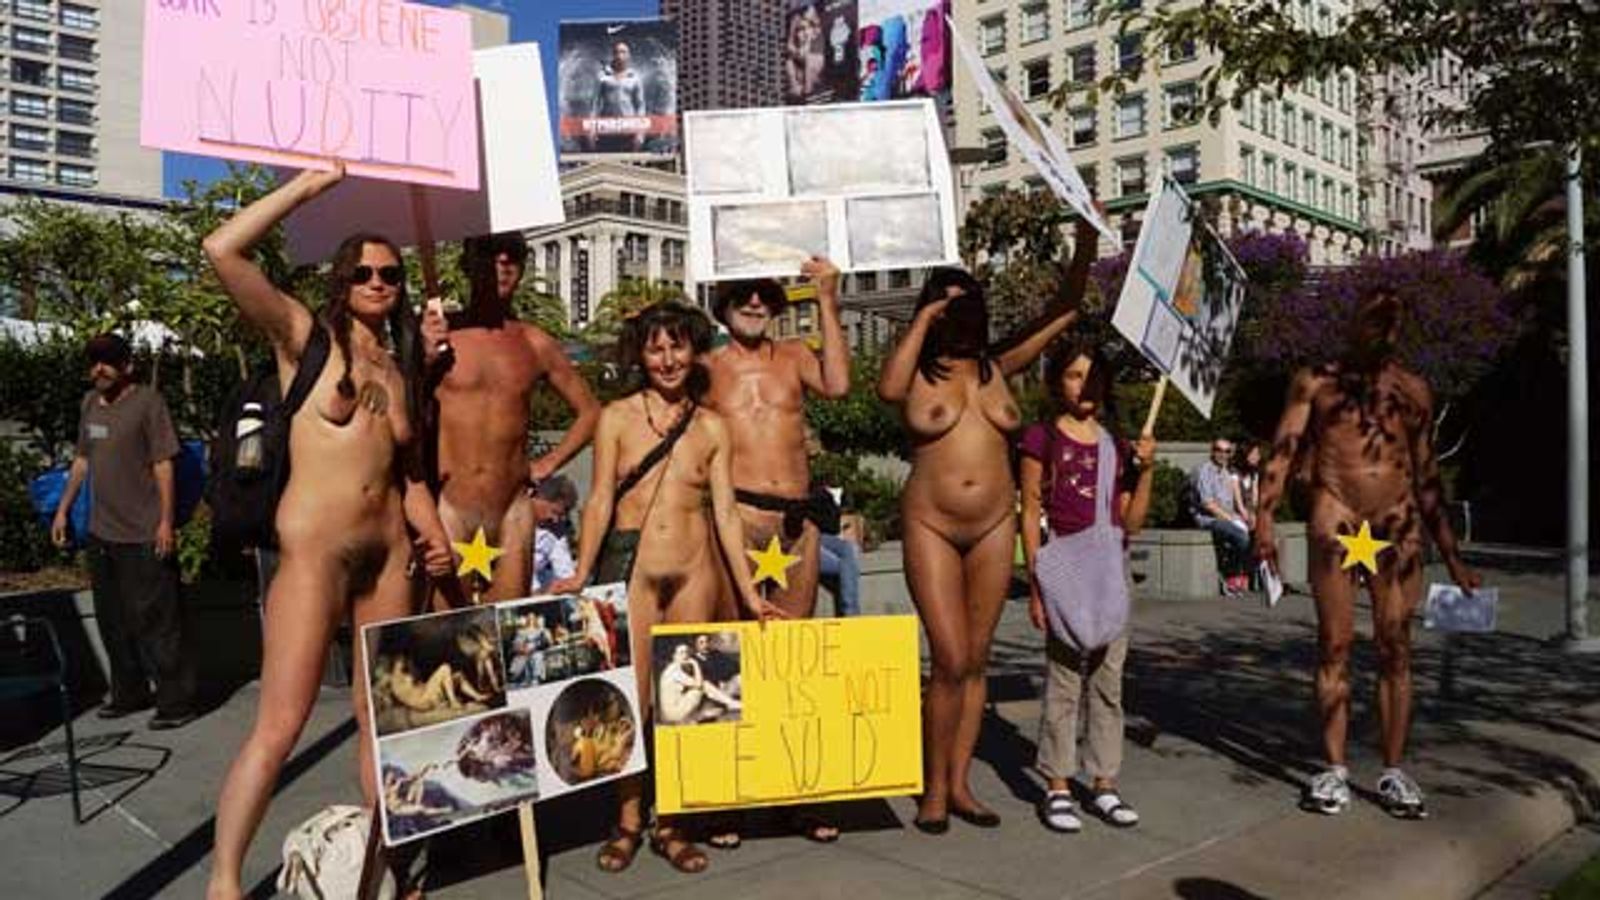 Nudism Supporter Will Announce Candidacy at Feb. 1 Protest